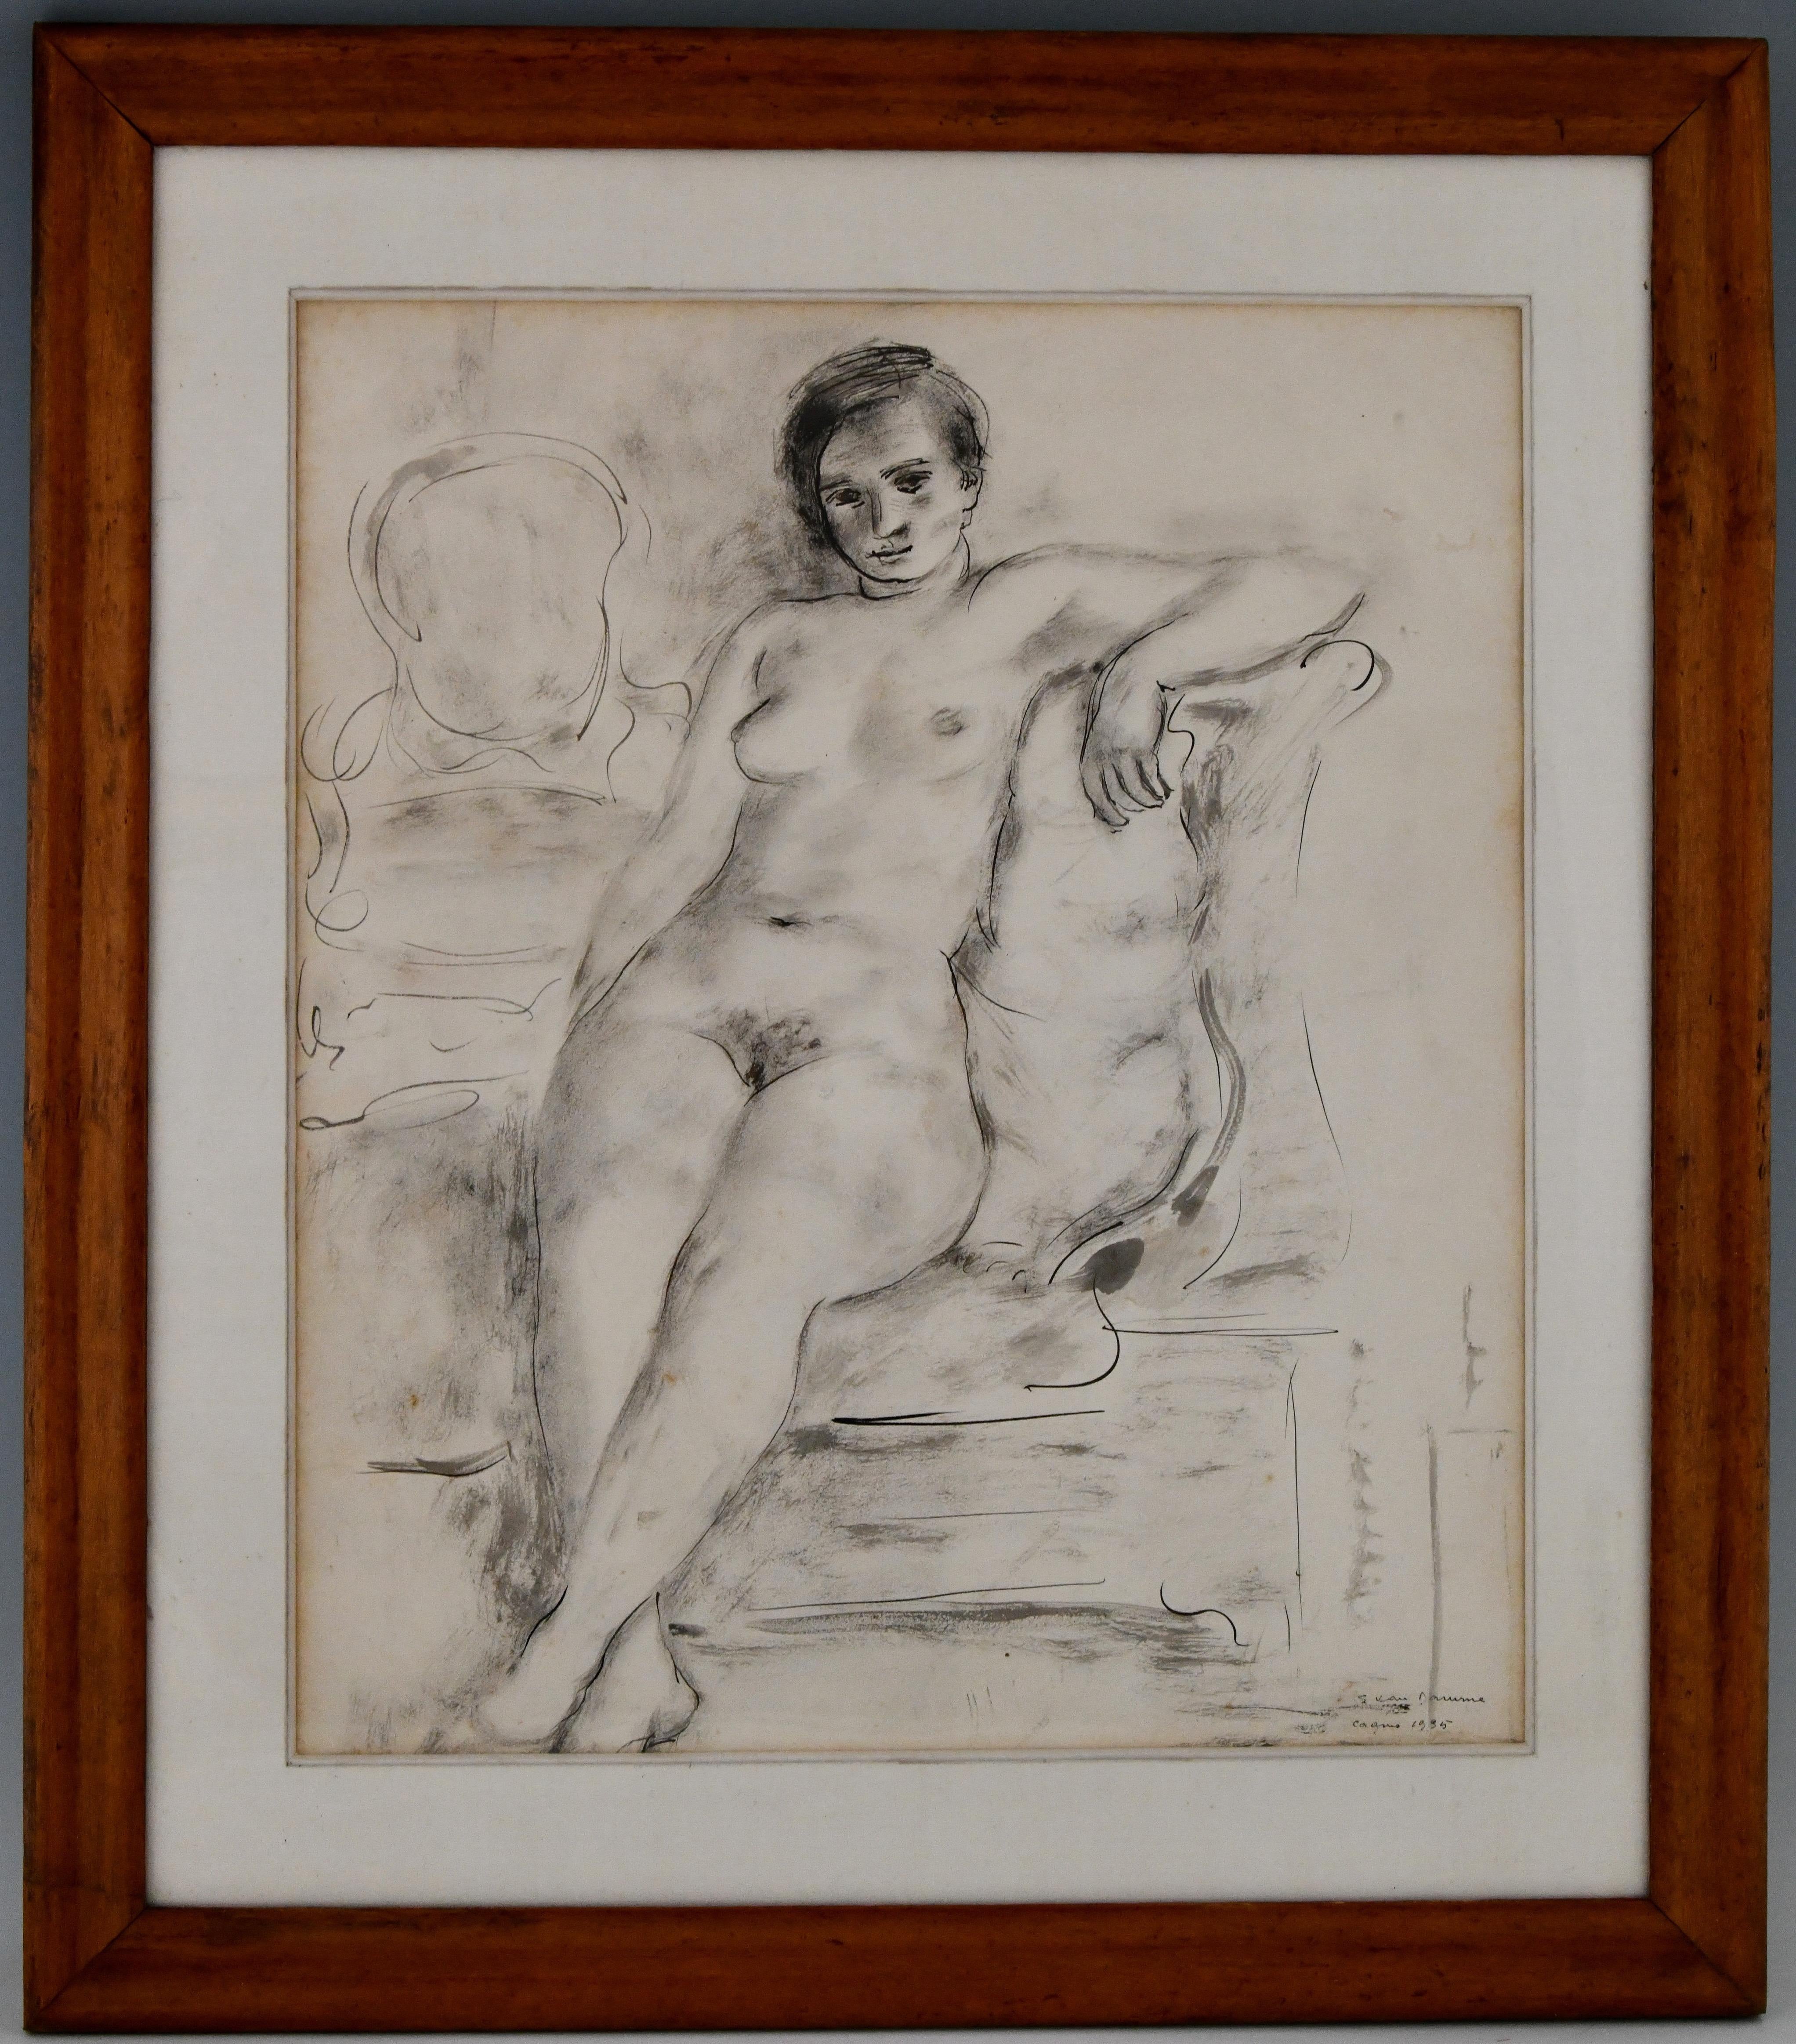 Art Deco ink drawing of a seated nude by Suzanne van Damme, signed and dated 1935. 
In wooden frame.
Dimensions framed:
L. 67.5 cm. x H. 77 cm. x W. 4 cm. 
L. 26.6 inch. X H. 30.3 inch x W. 1.6 inch.
Unframed:
L. 48 cm. x H. 56 cm. 
L. 18.9